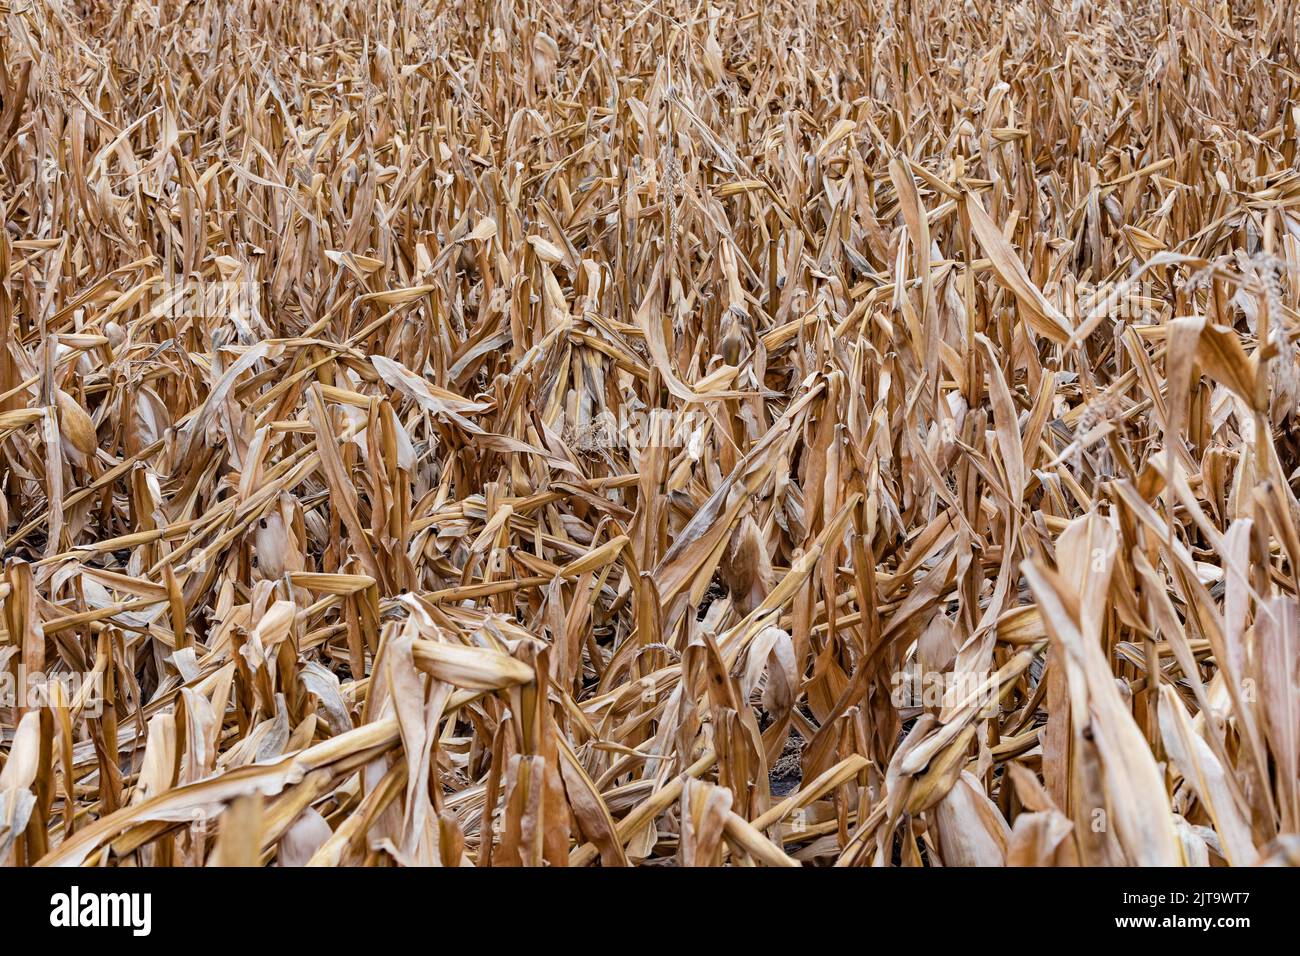 The corn field dried up and buckled means crop failure everywhere in Germany Stock Photo